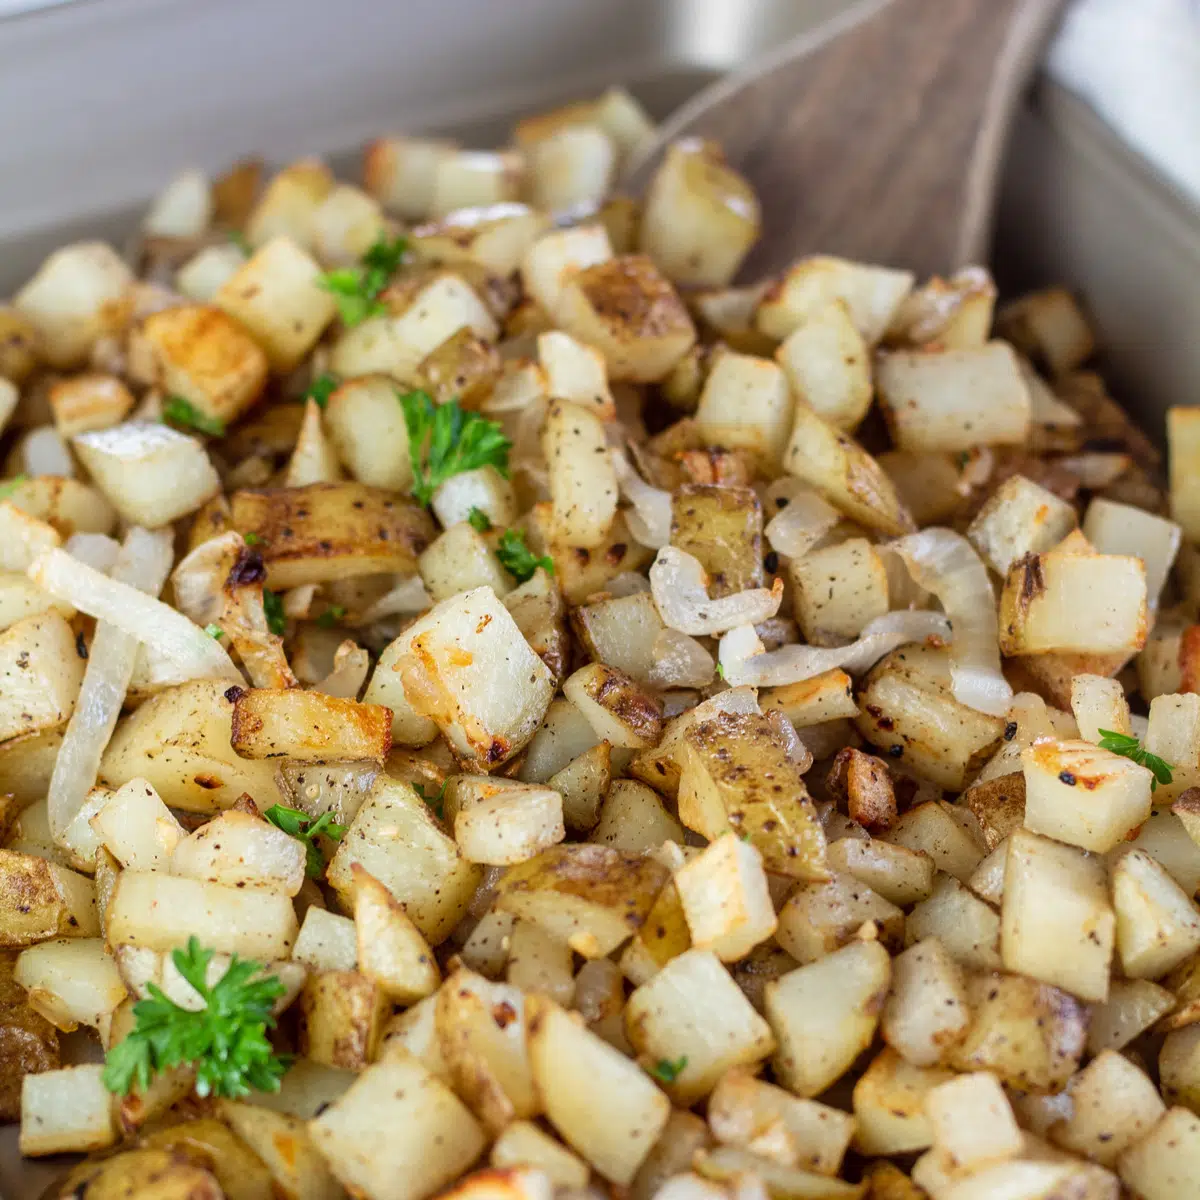 Square image showing roasted potatoes and onions.